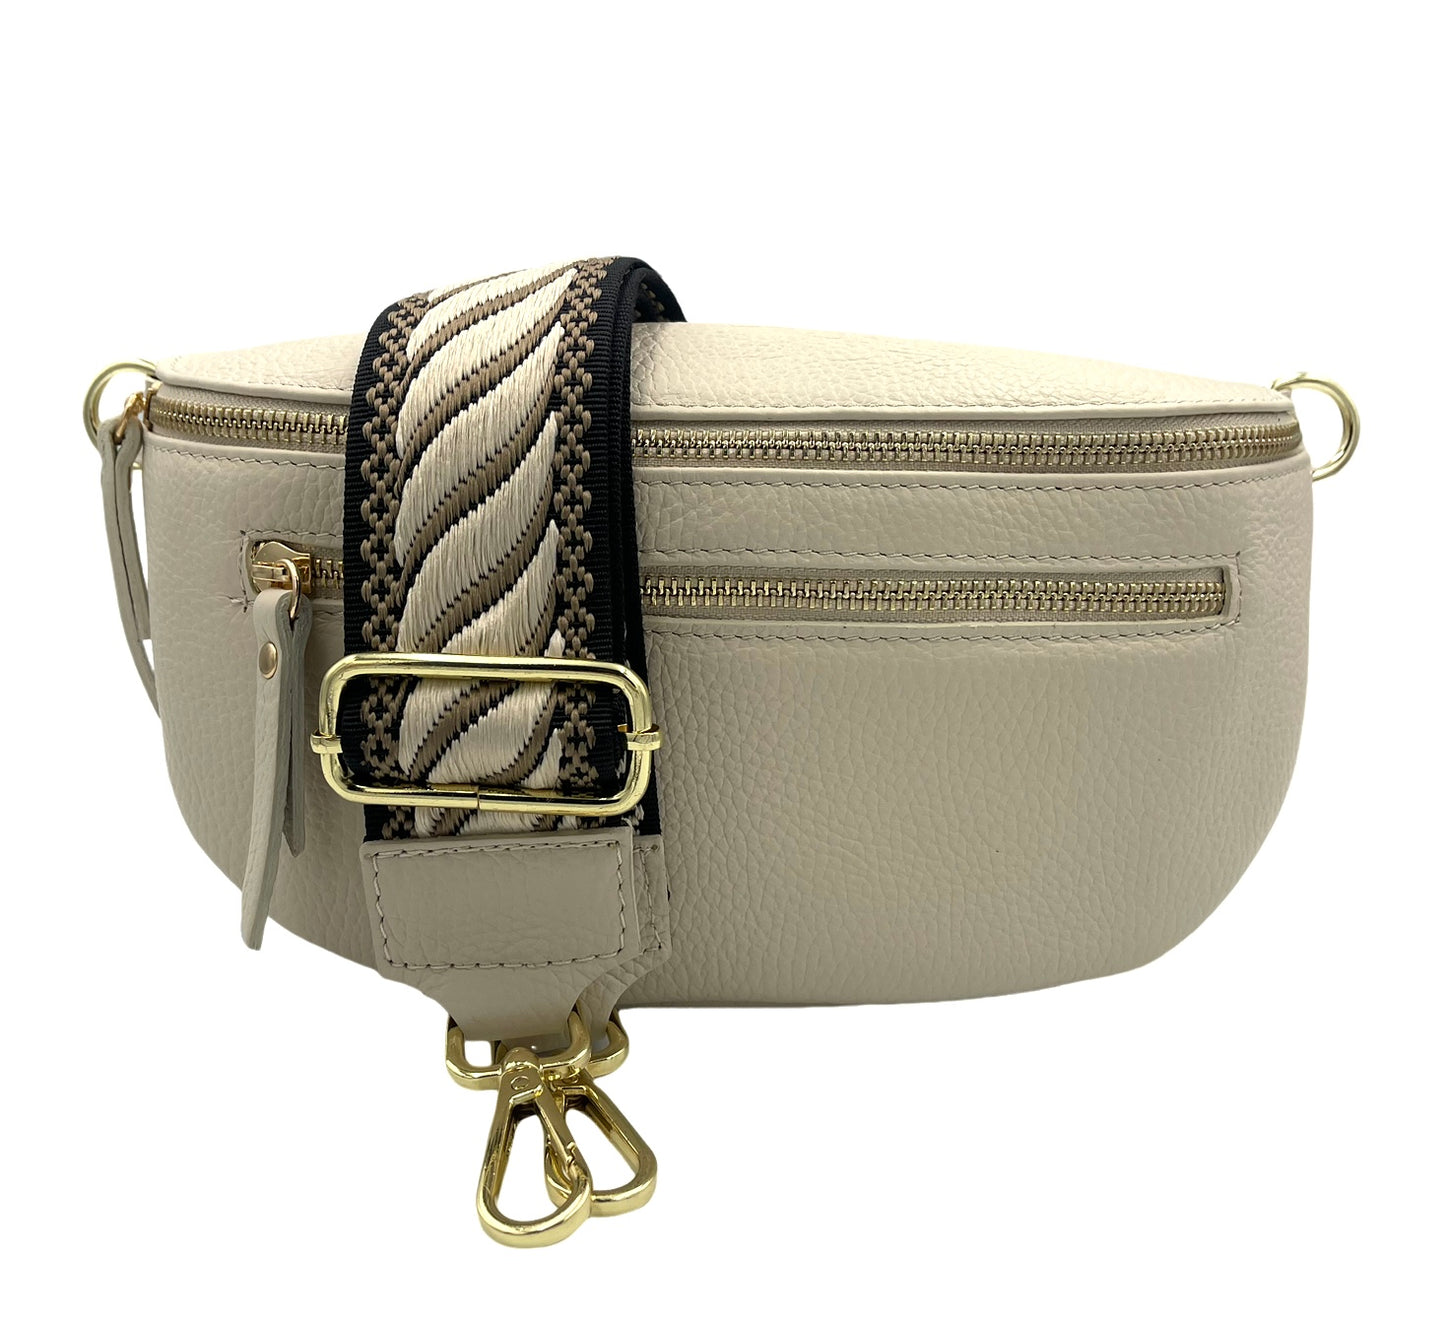 Sling Bag - cream double zipper with cream/blk/olive strap